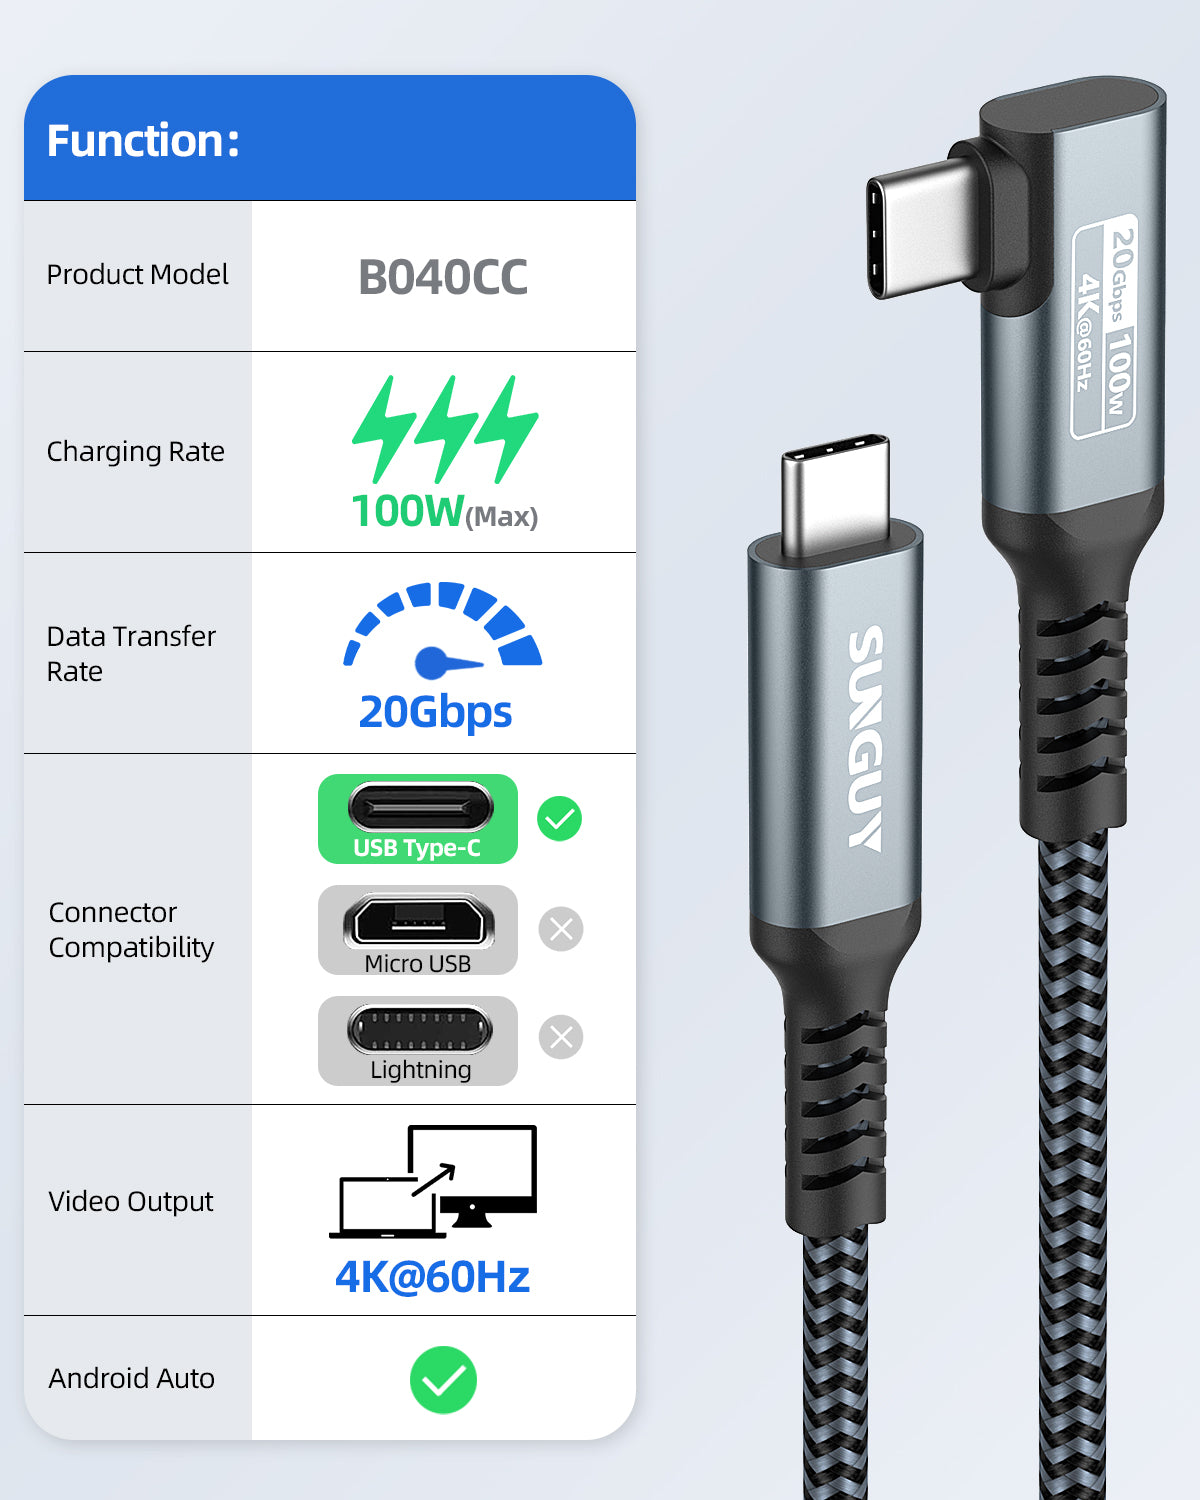 SUNGUY Right Angle USB C to USB C Cable,20Gbps USB C 3.2 Gen 2 Data 100W PD Cable,Wholesale 100pcs / lot